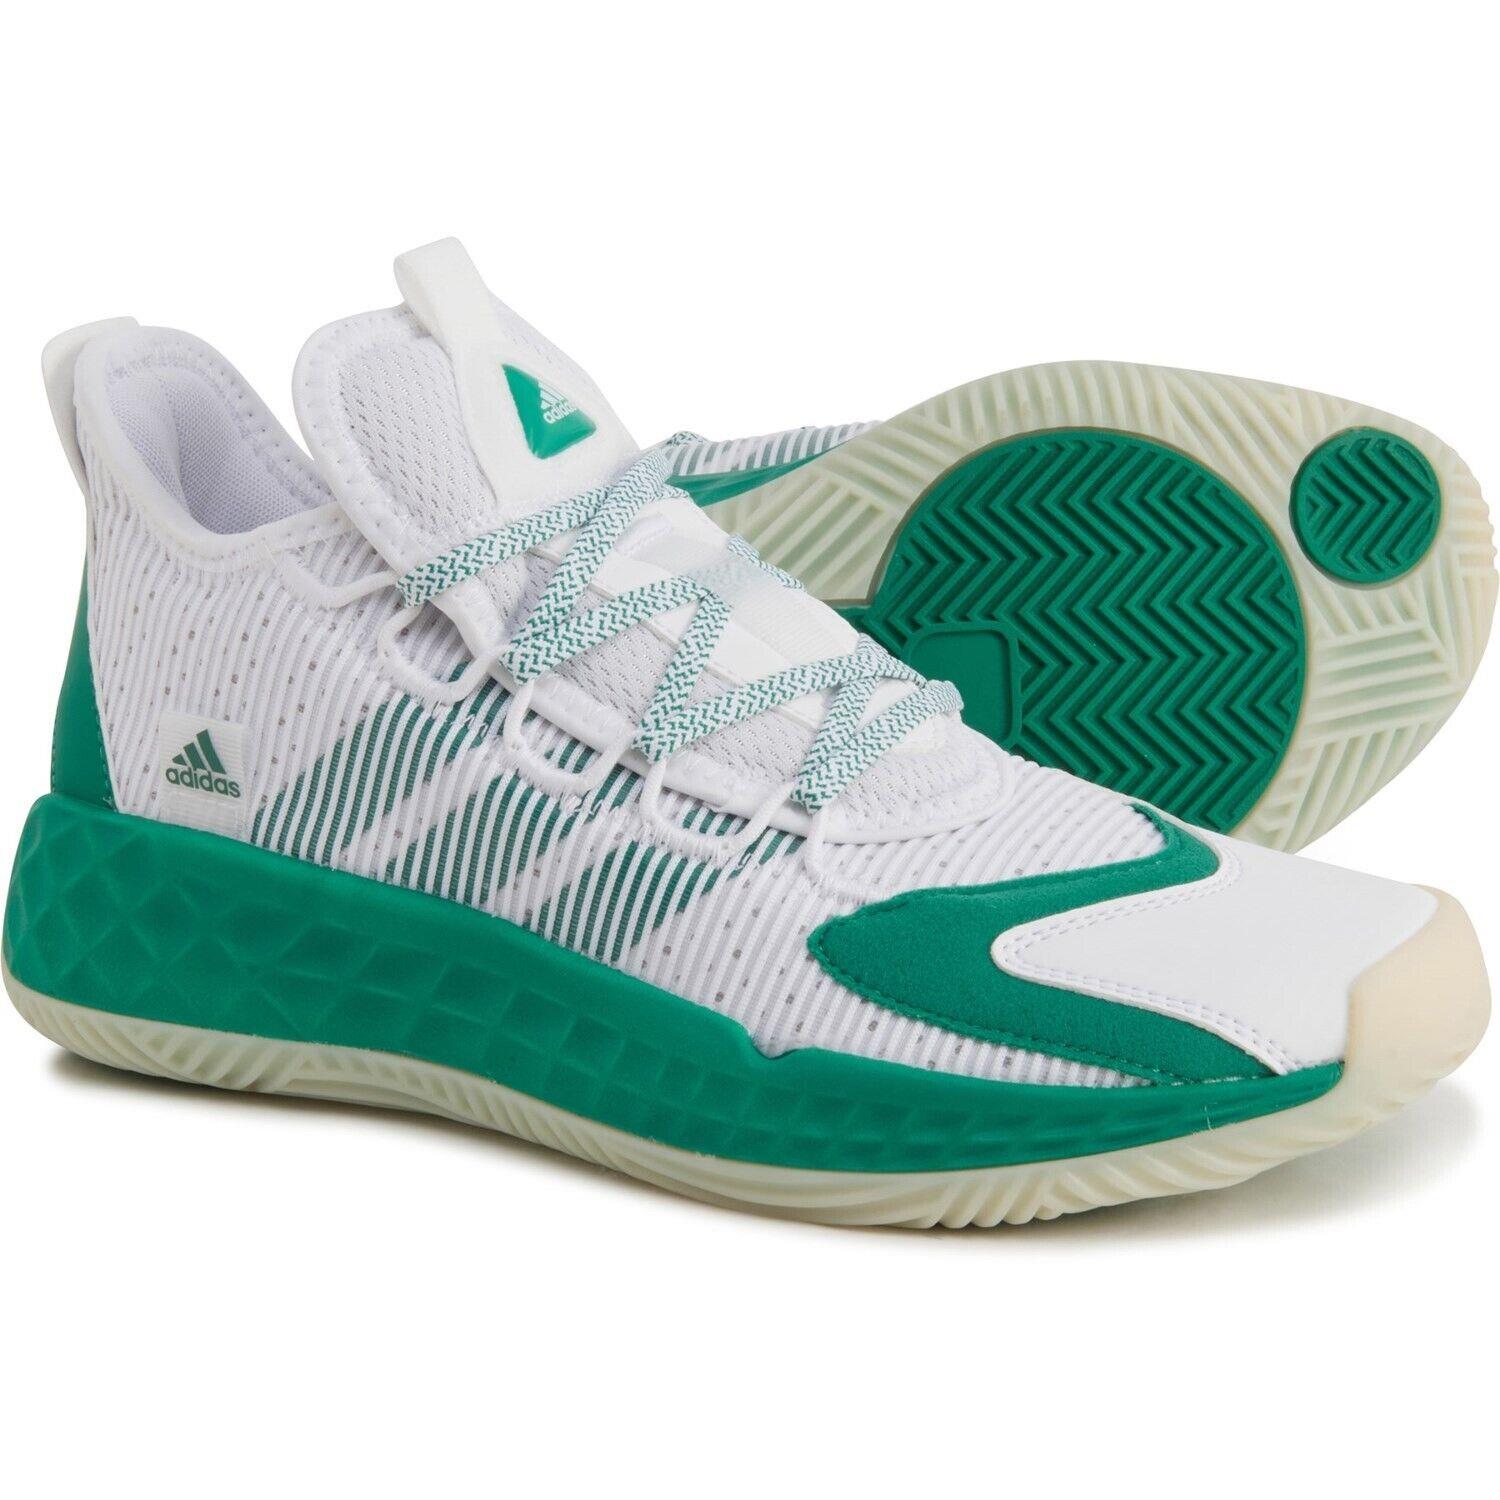 Adidas Pro Boost Low White Green sz 18 FX9217 Mens Basketball Shoes Low Top